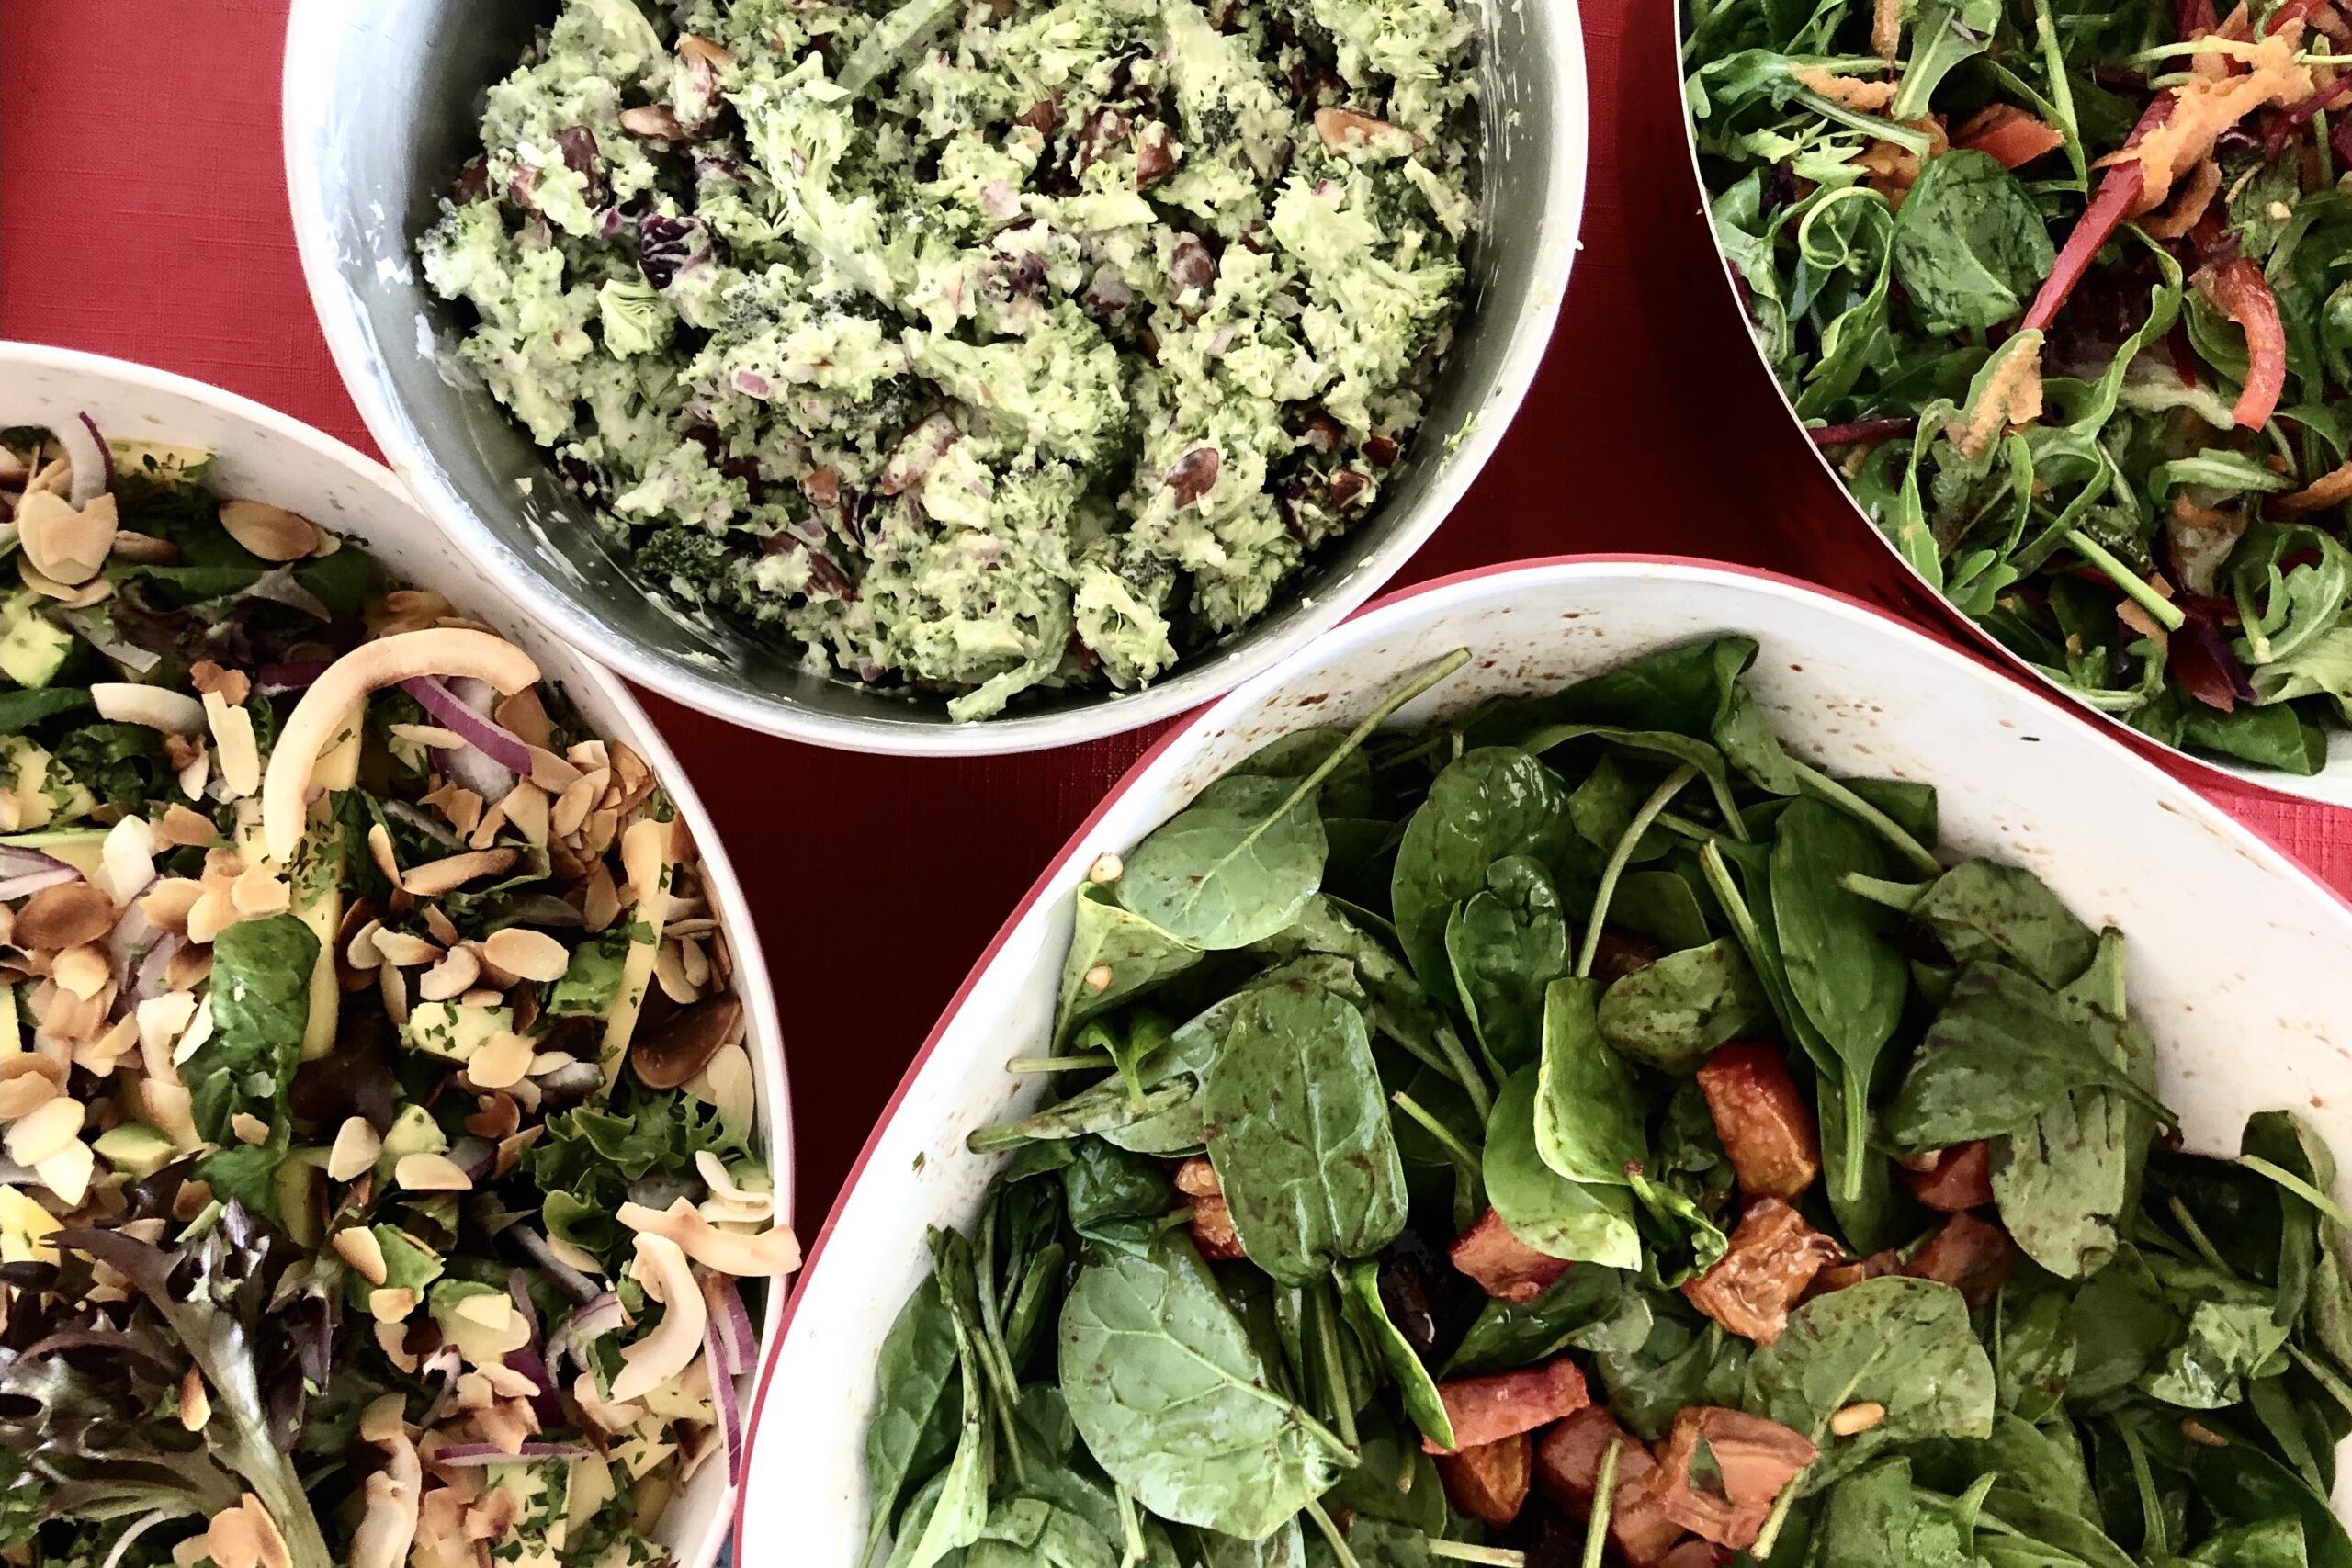 Instead of presents, I asked for… salads